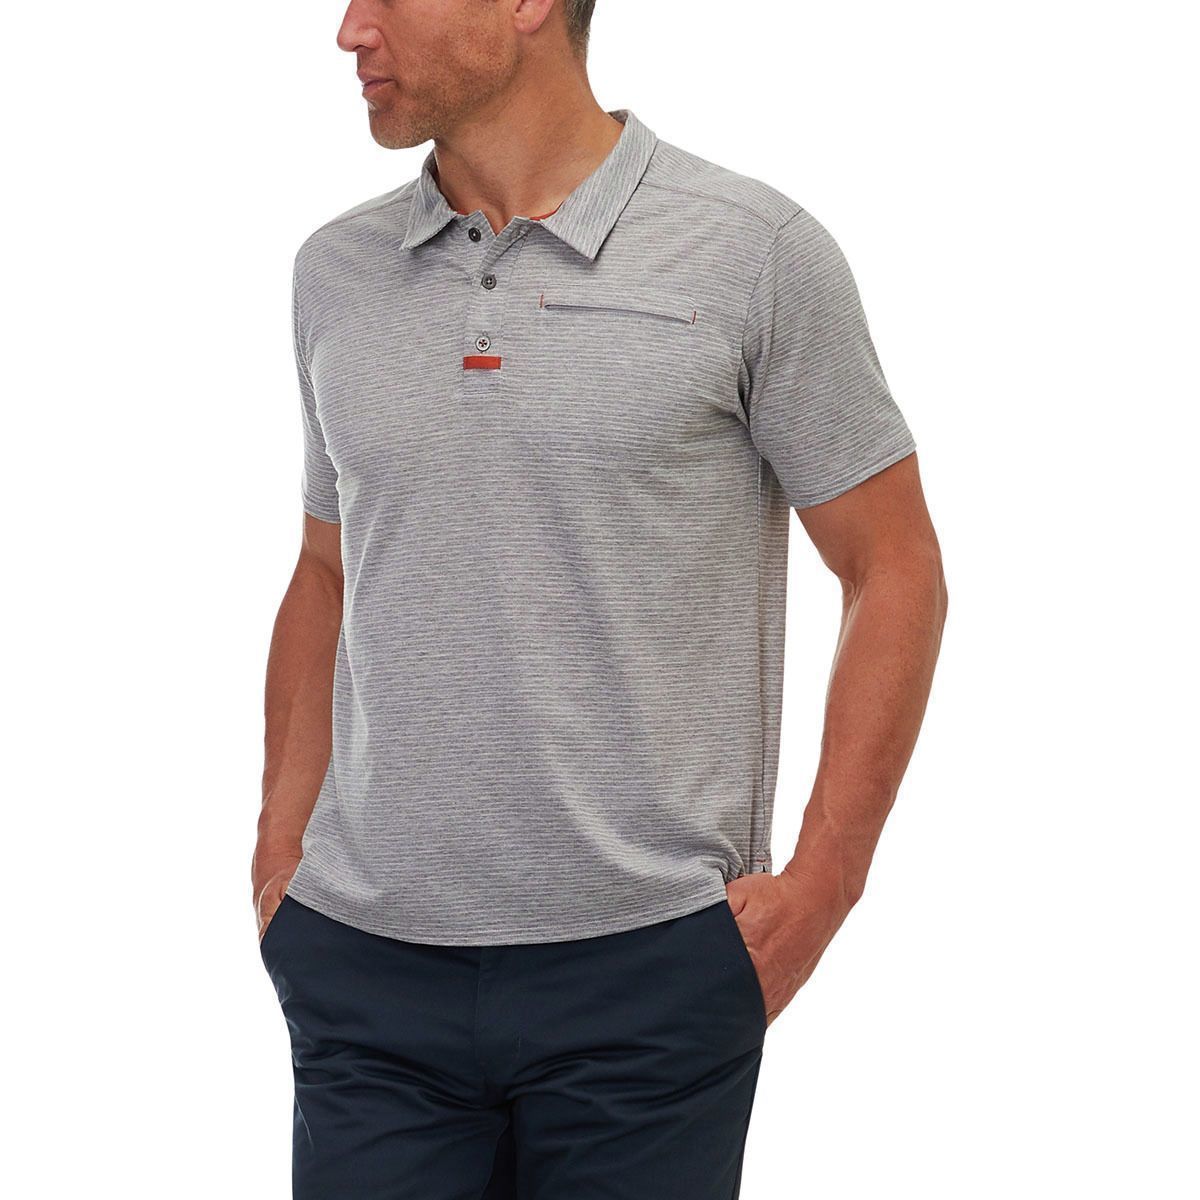 Basin and Range Round Valley Performance Polo Shirt - Men's